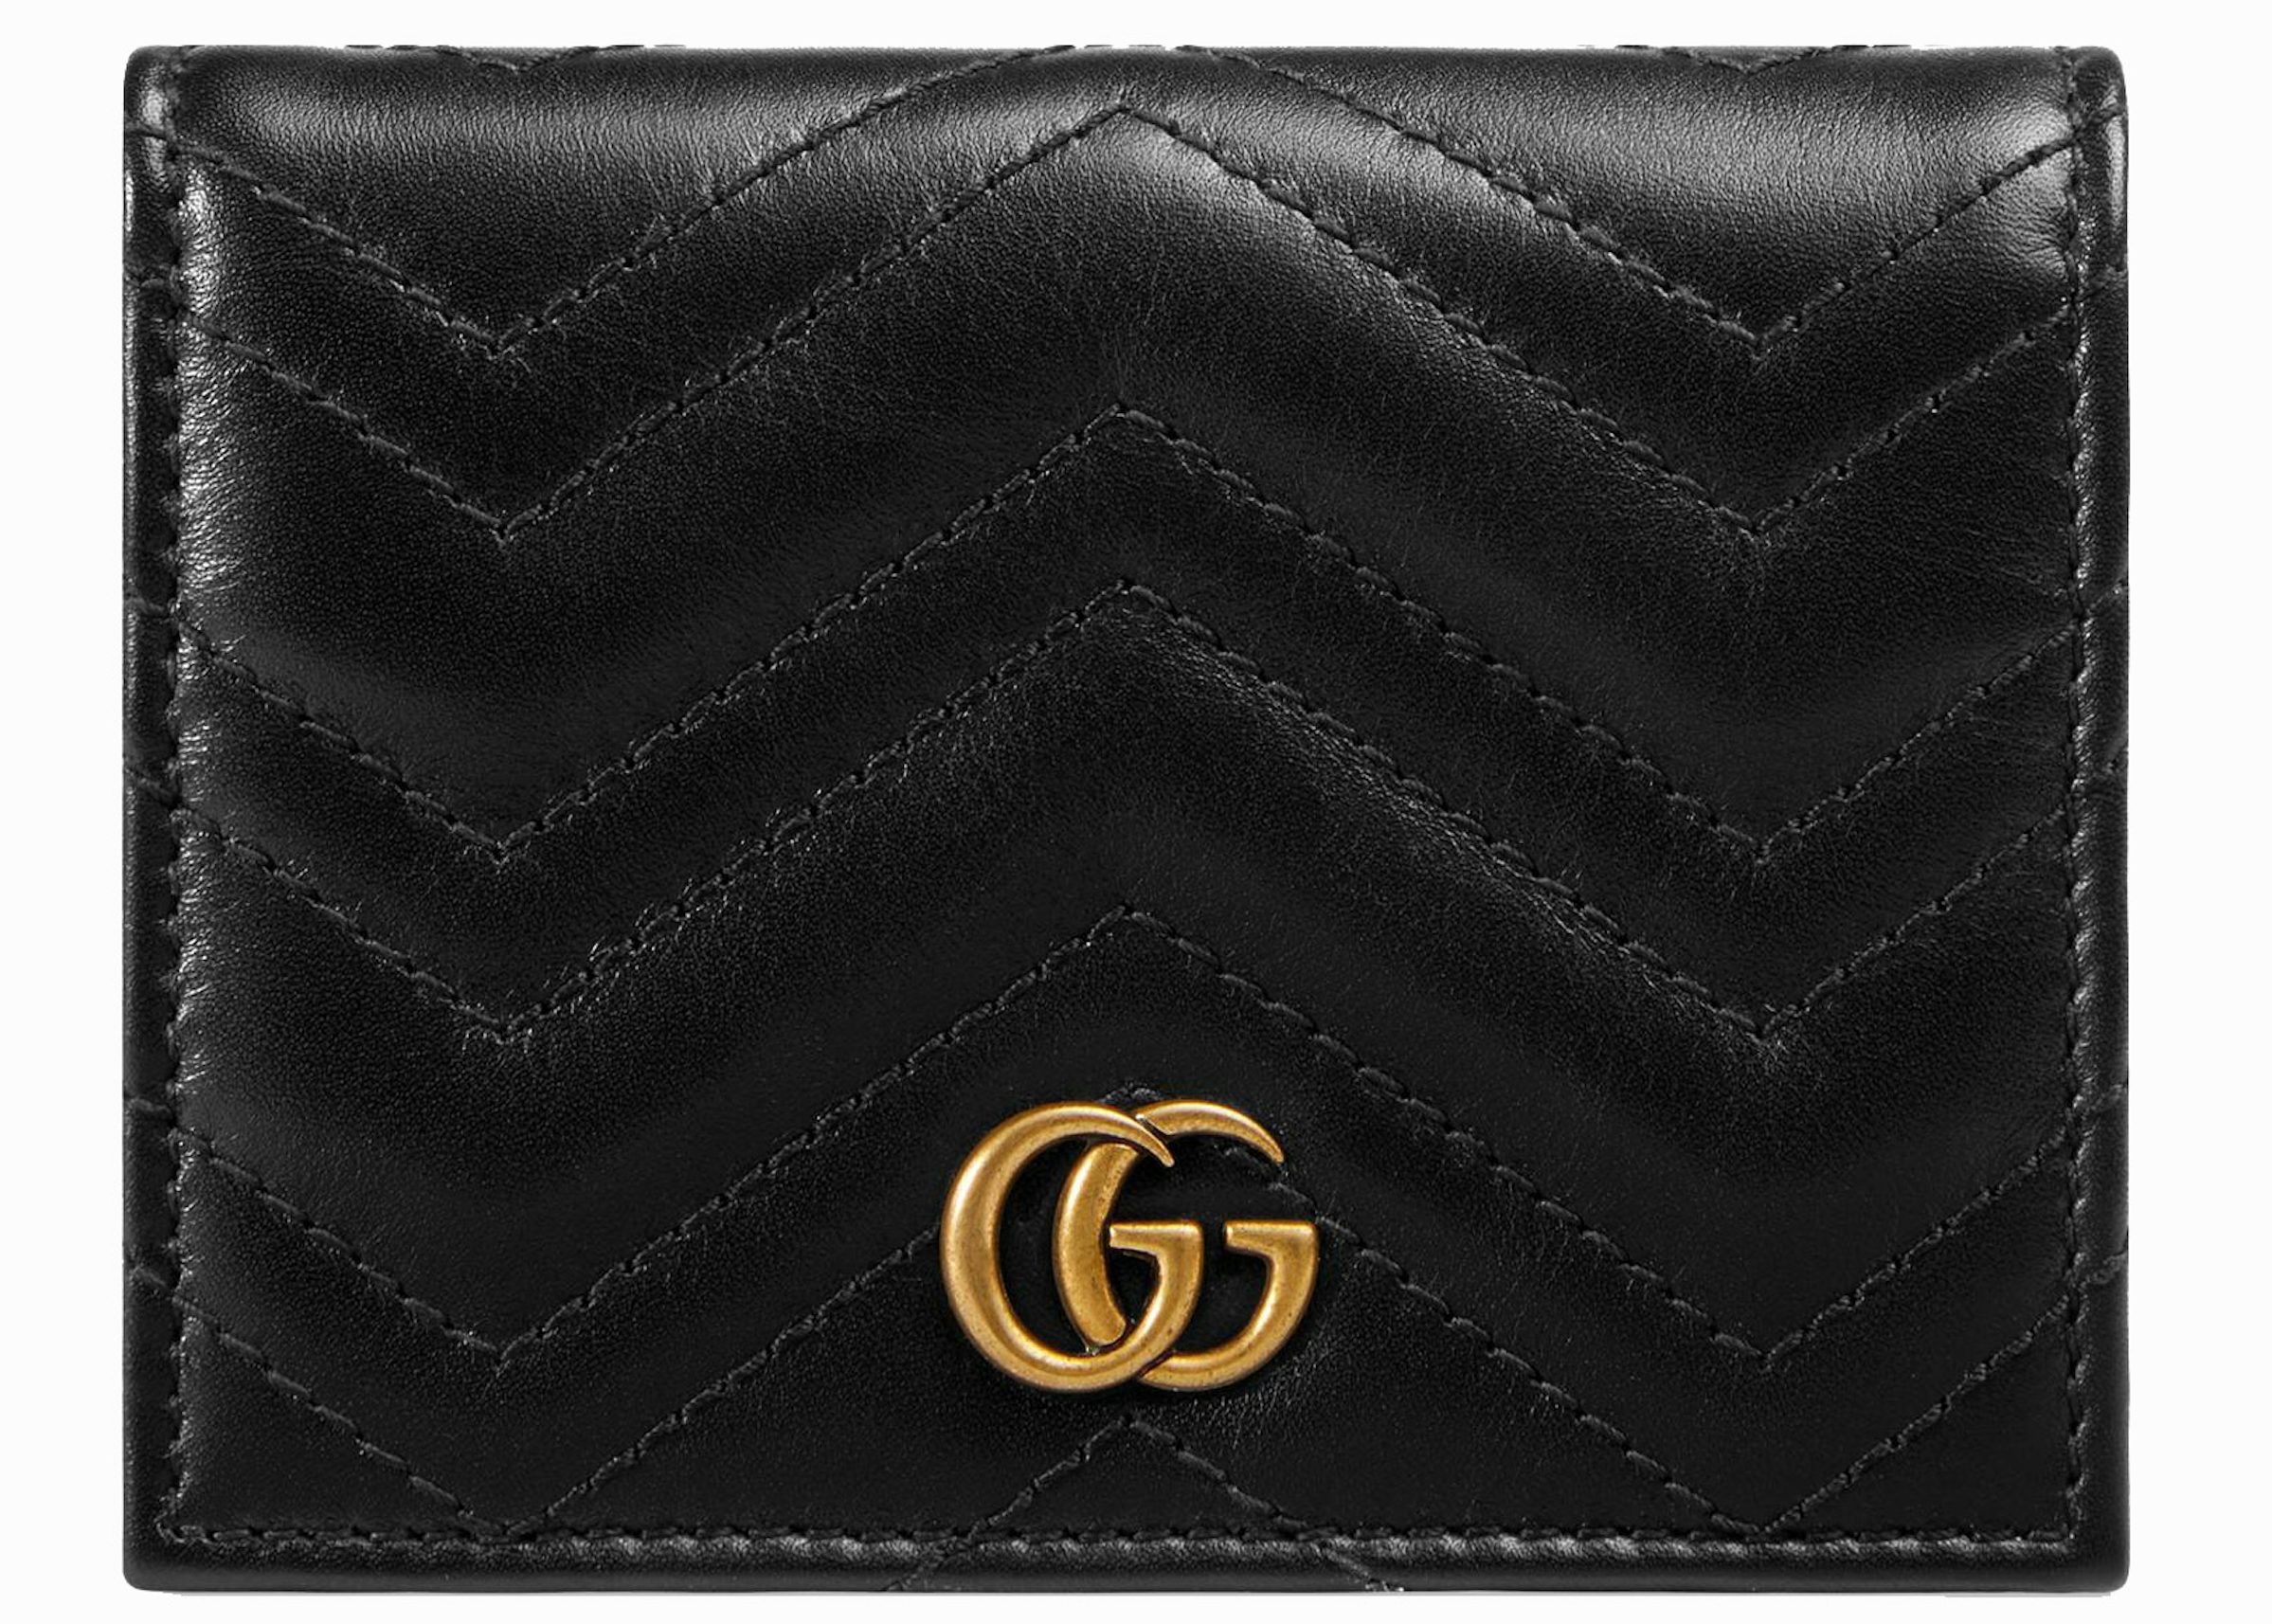 New Authentic Gucci Matelasse GG Marmont Card Case Wallet in blue,Multicolor